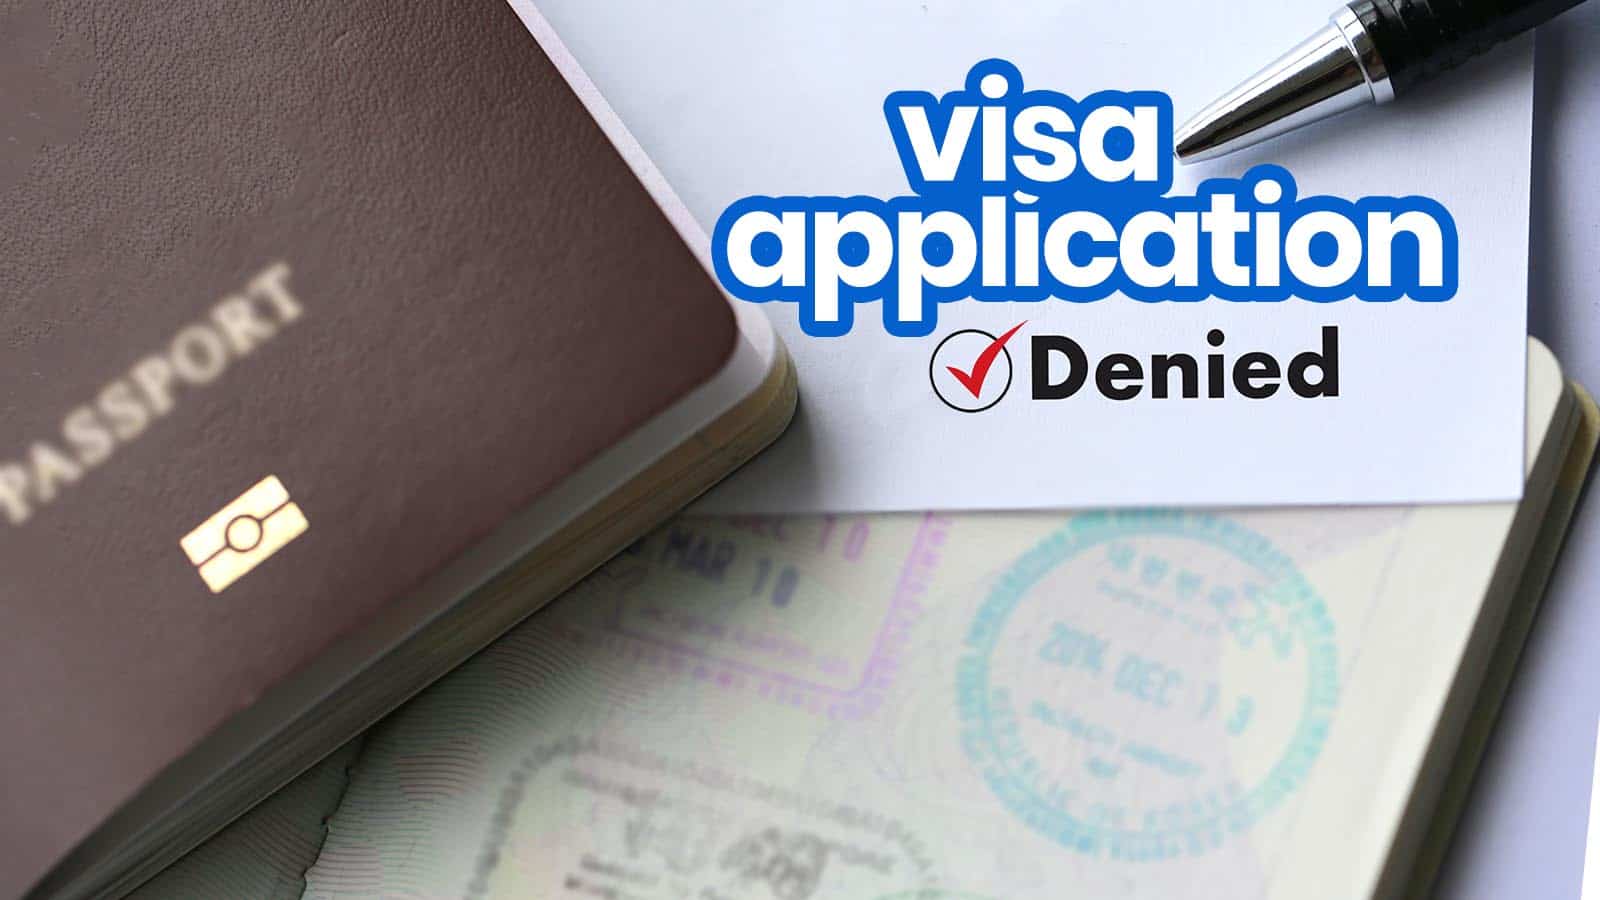 VISA APPLICATION DENIED: 10 Common Reasons and How to Avoid Them